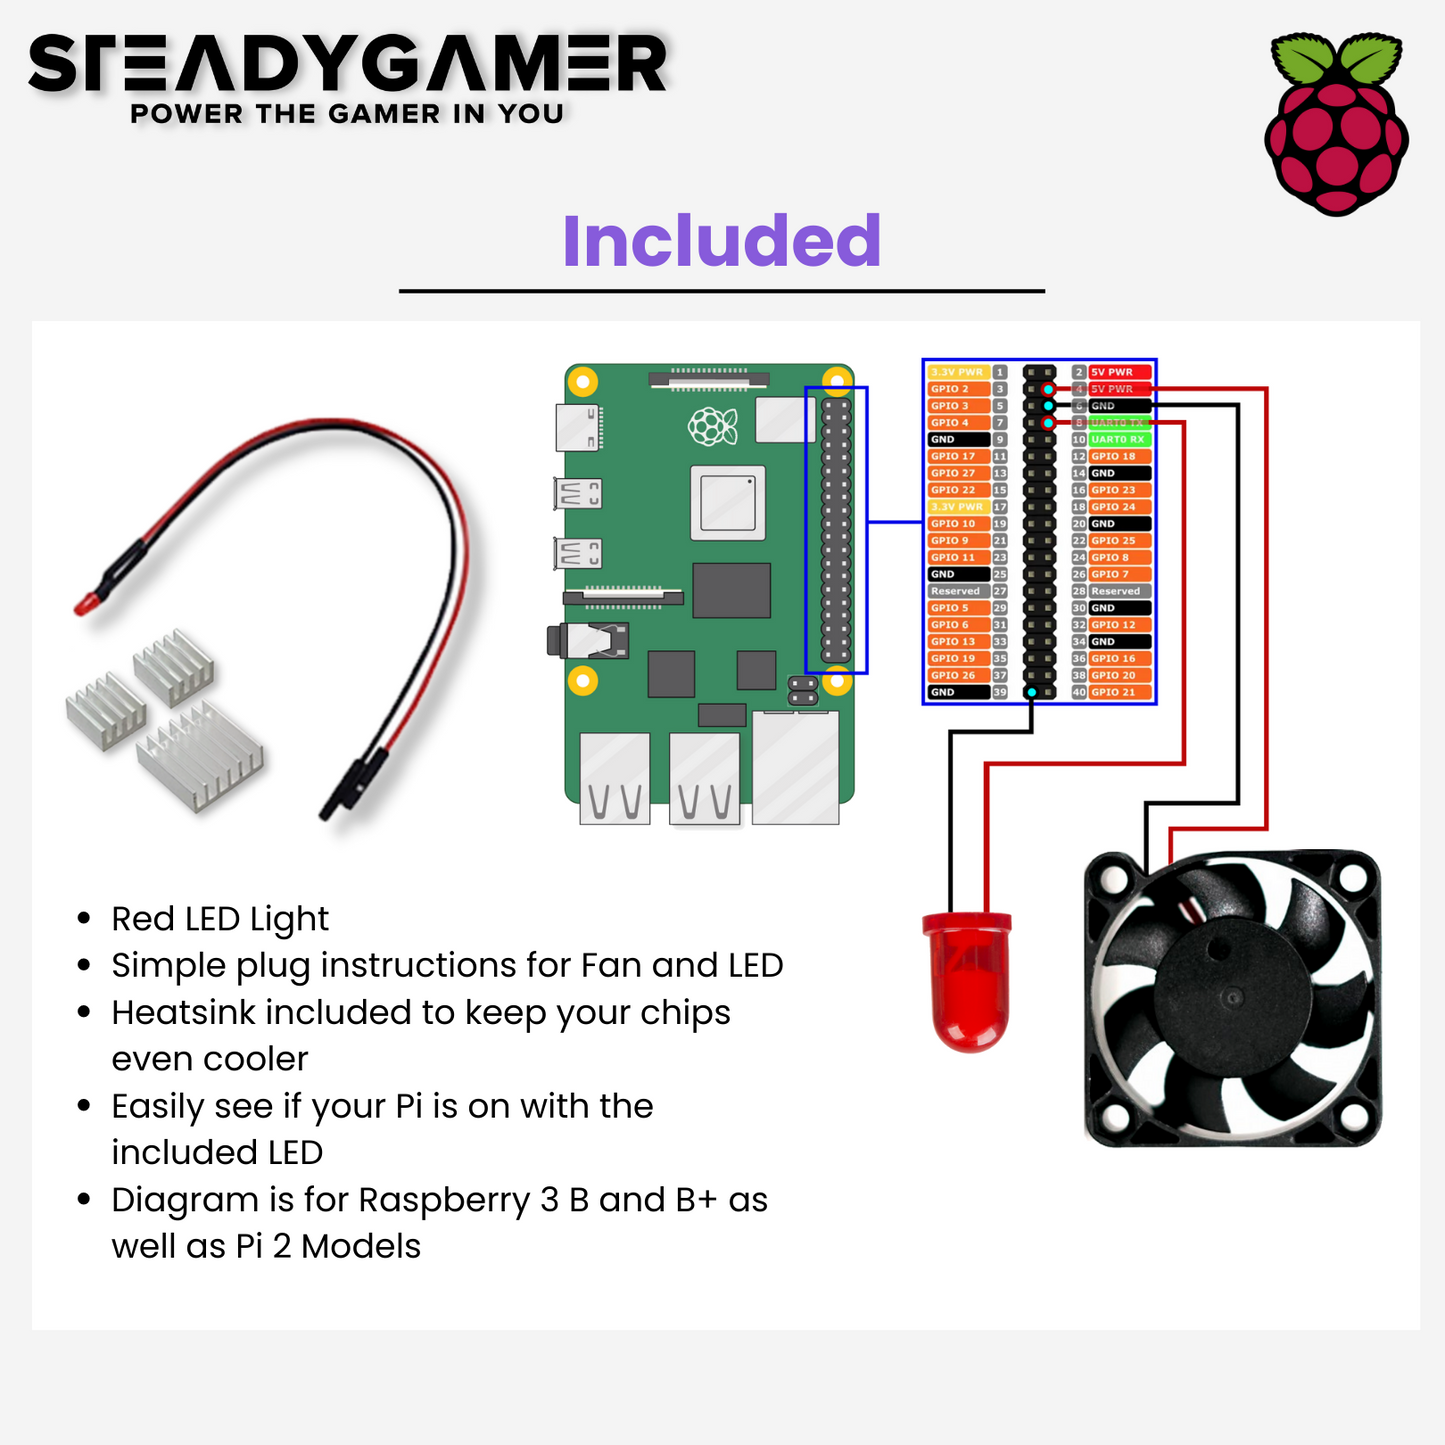 SNES Pi Case for Raspberry Pi 3B+, 3B and 2B with LED, Fan, and Heatsink (Version 1)